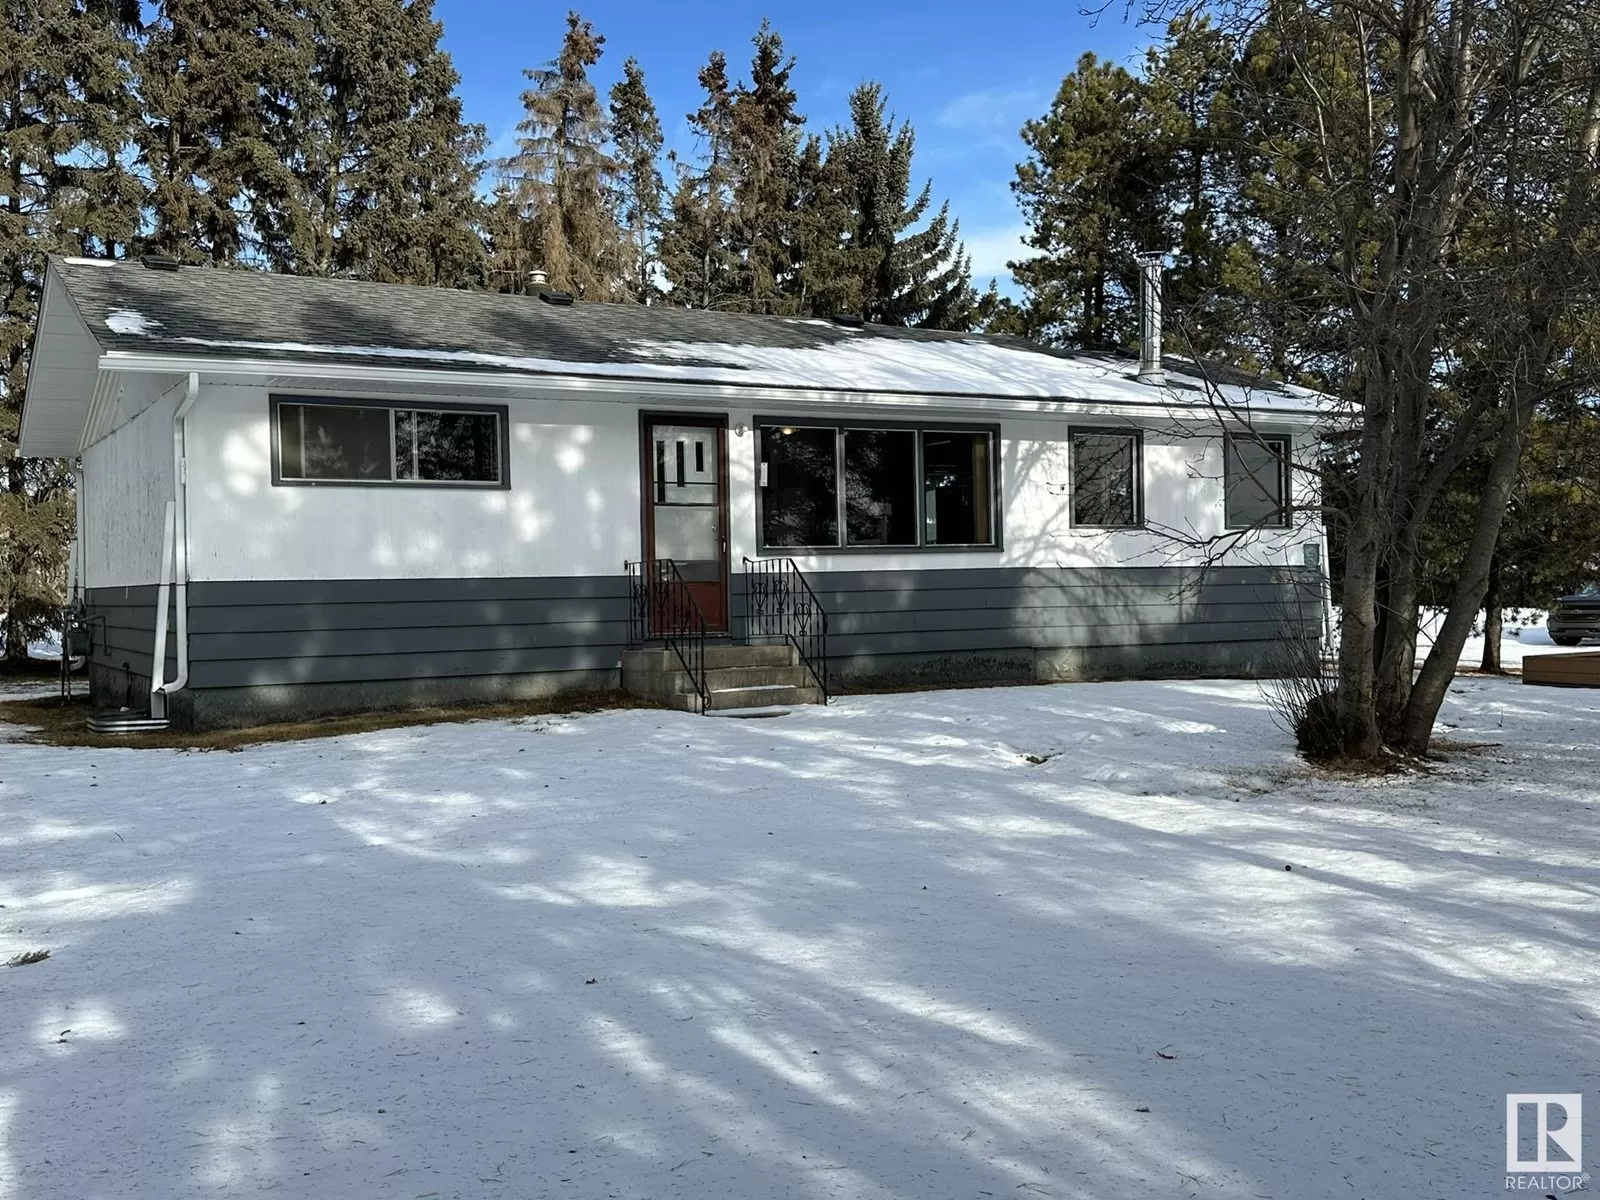 House for rent: 17331 Twp 592 Rd, Rural Smoky Lake County, Alberta T0A 3C0